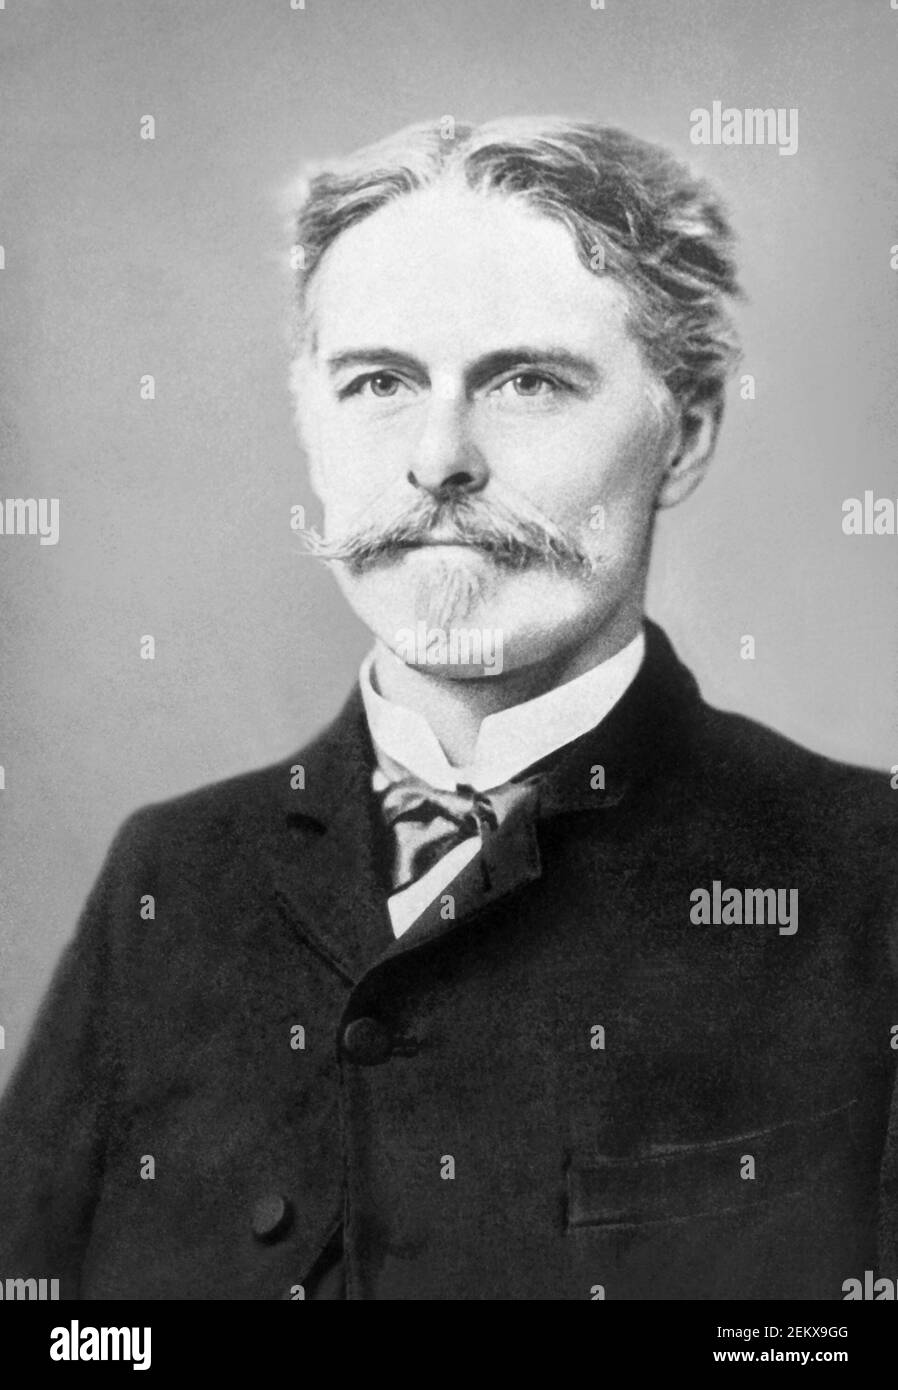 Edward Drinker Cope (1840–1897), American paleontologist, zoologist, and herpetologist. Cope is perhaps best remembered for a personal feud with paleontologist Othniel Charles Marsh which led to a period of intense fossil-finding competition now known as the Bone Wars. Stock Photo